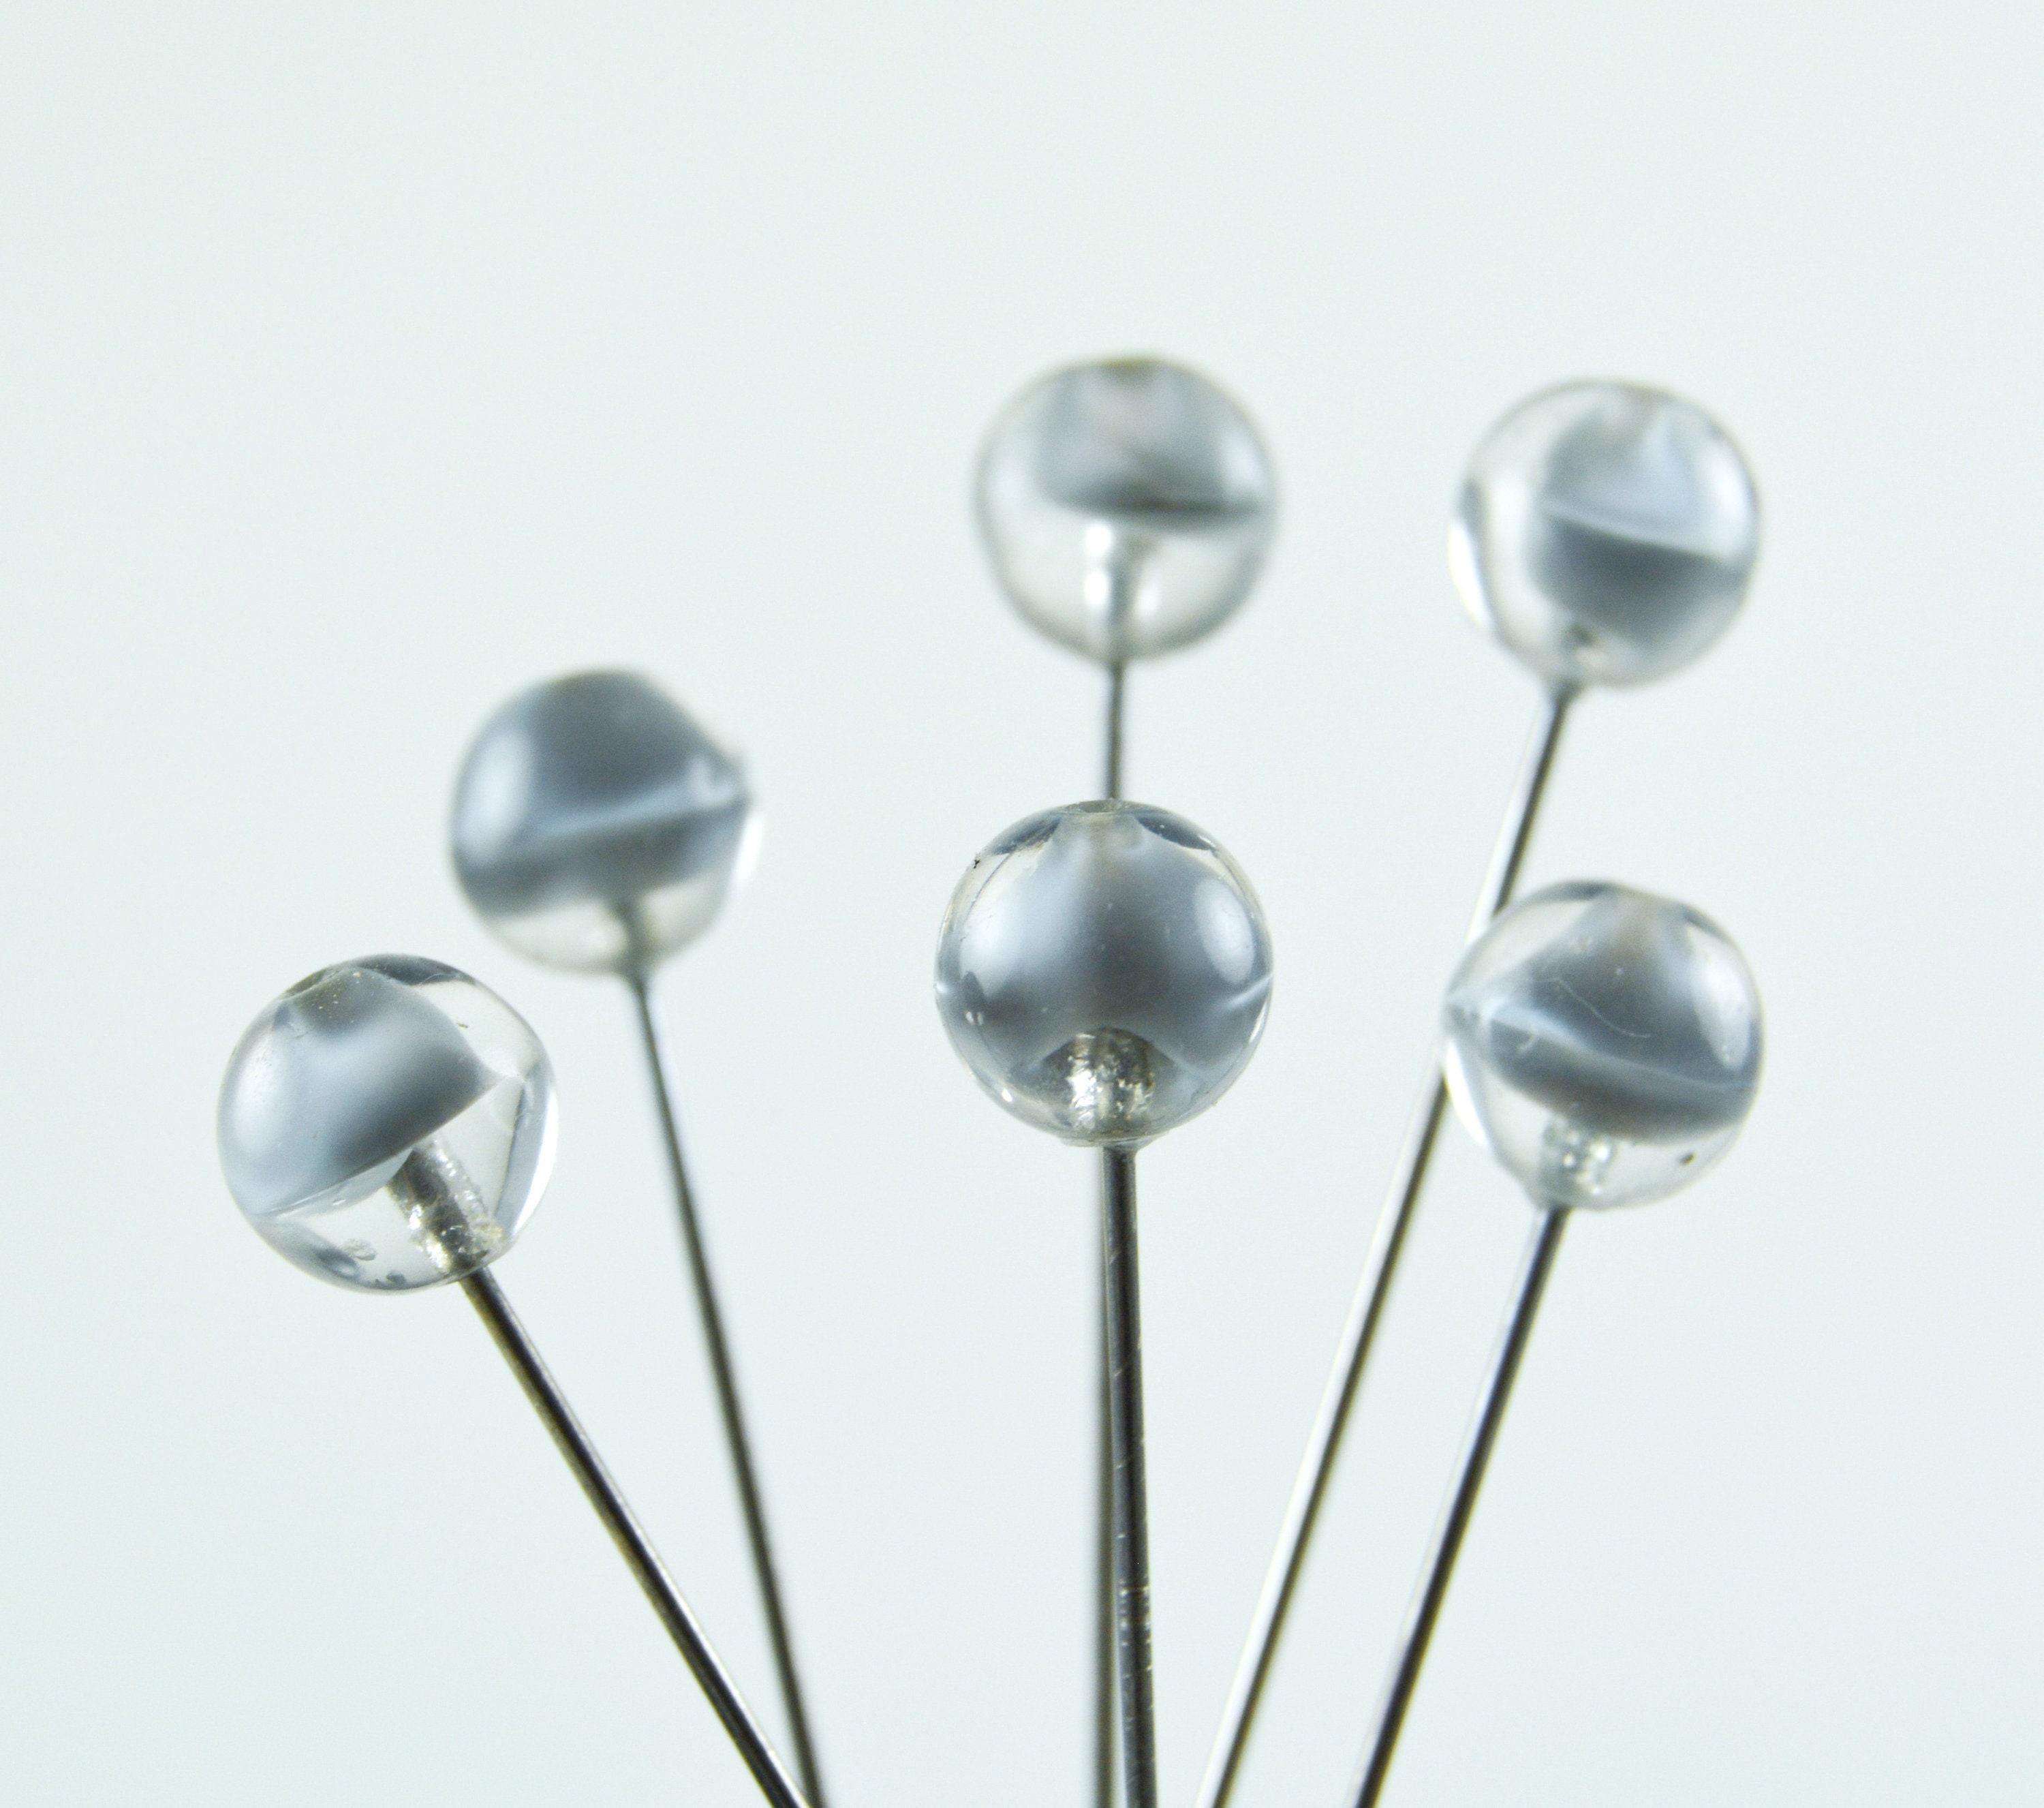 Clover Glass Head Sewing Pins Extra Fine & Sharp for Quilt Piecing